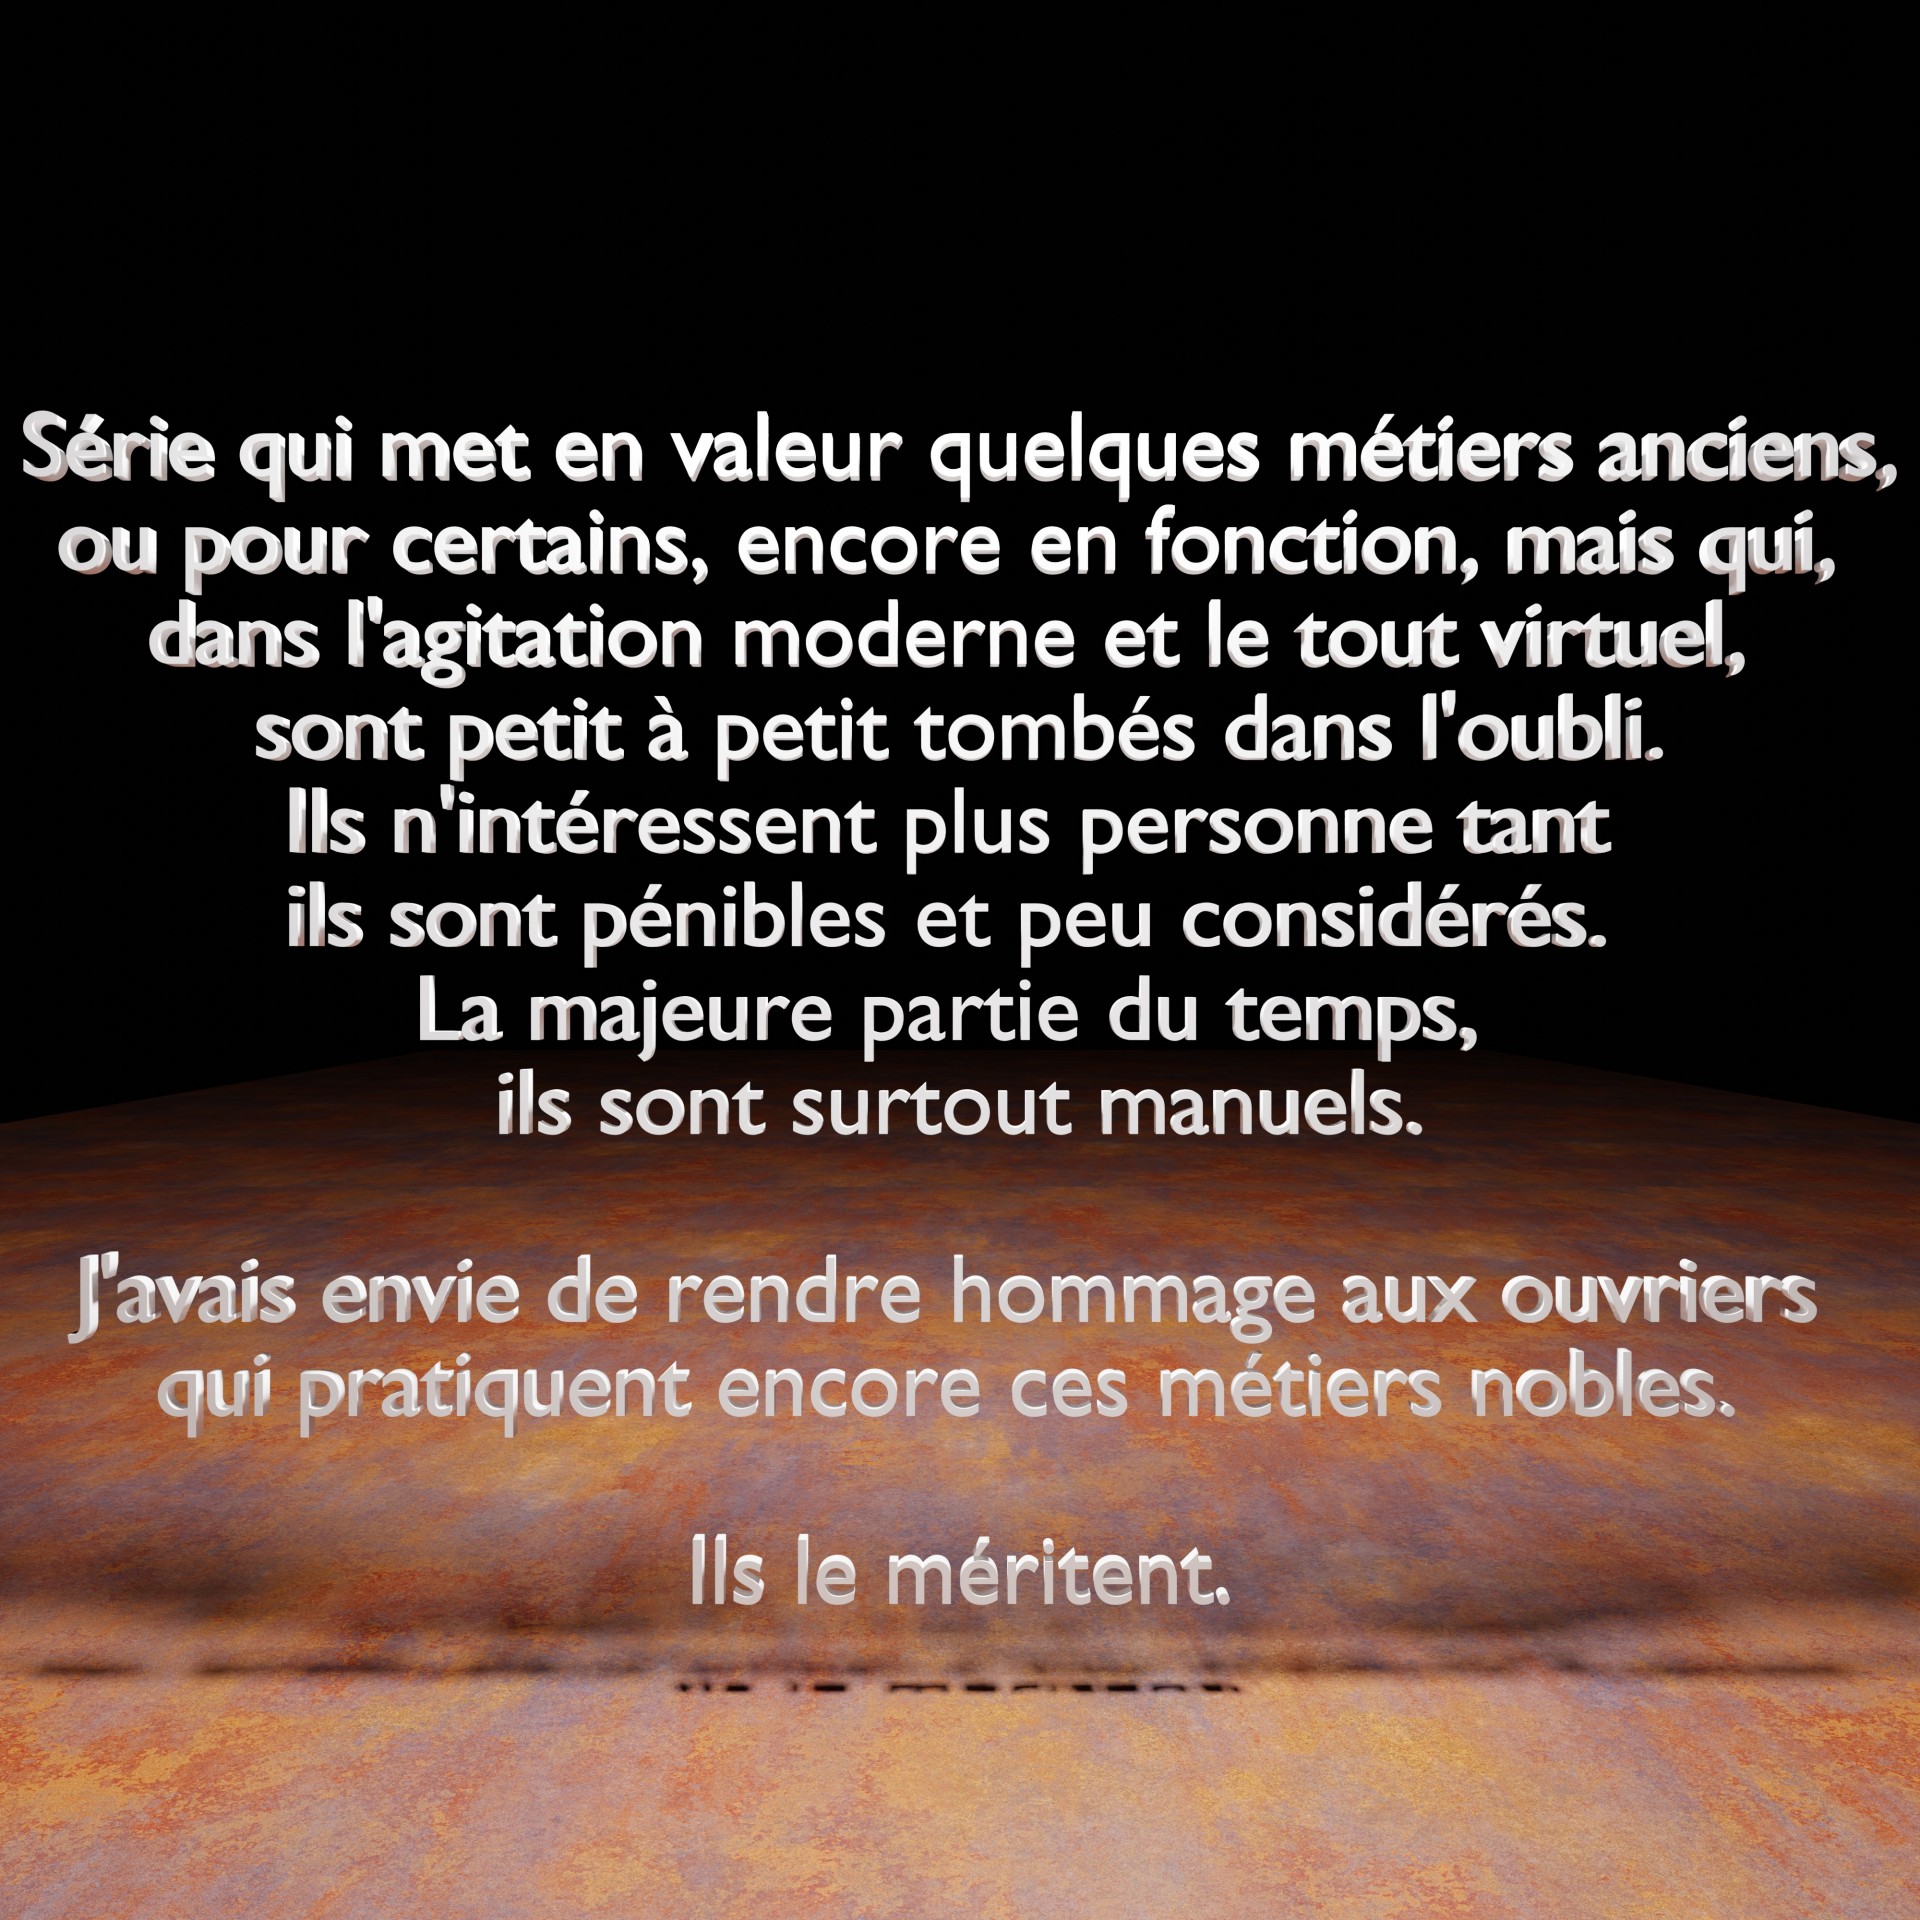 LES METIERS OUBLIES - Introduction